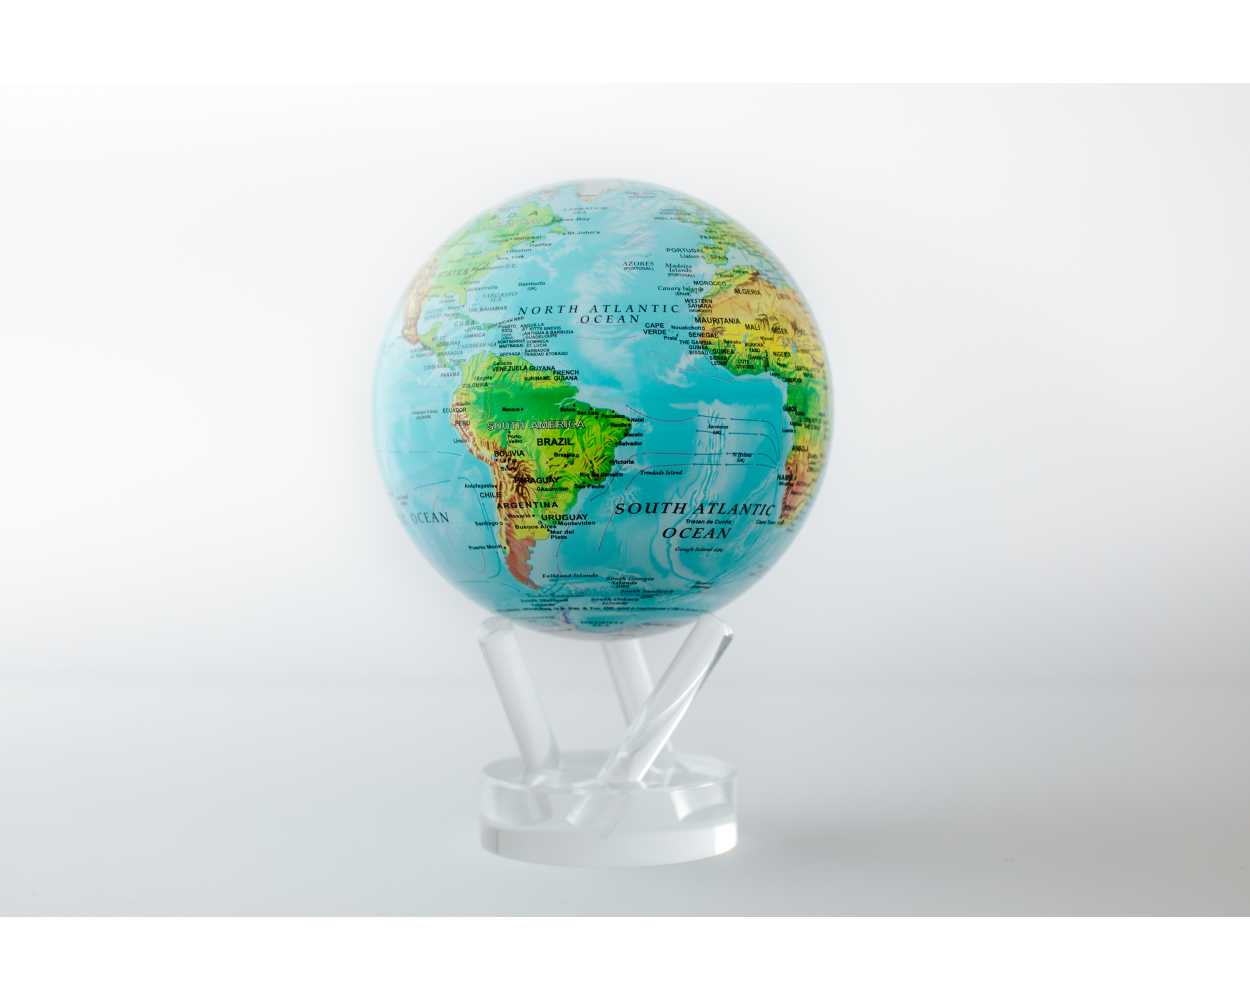 Explore Wholesale Mova Globe Options Available For You 